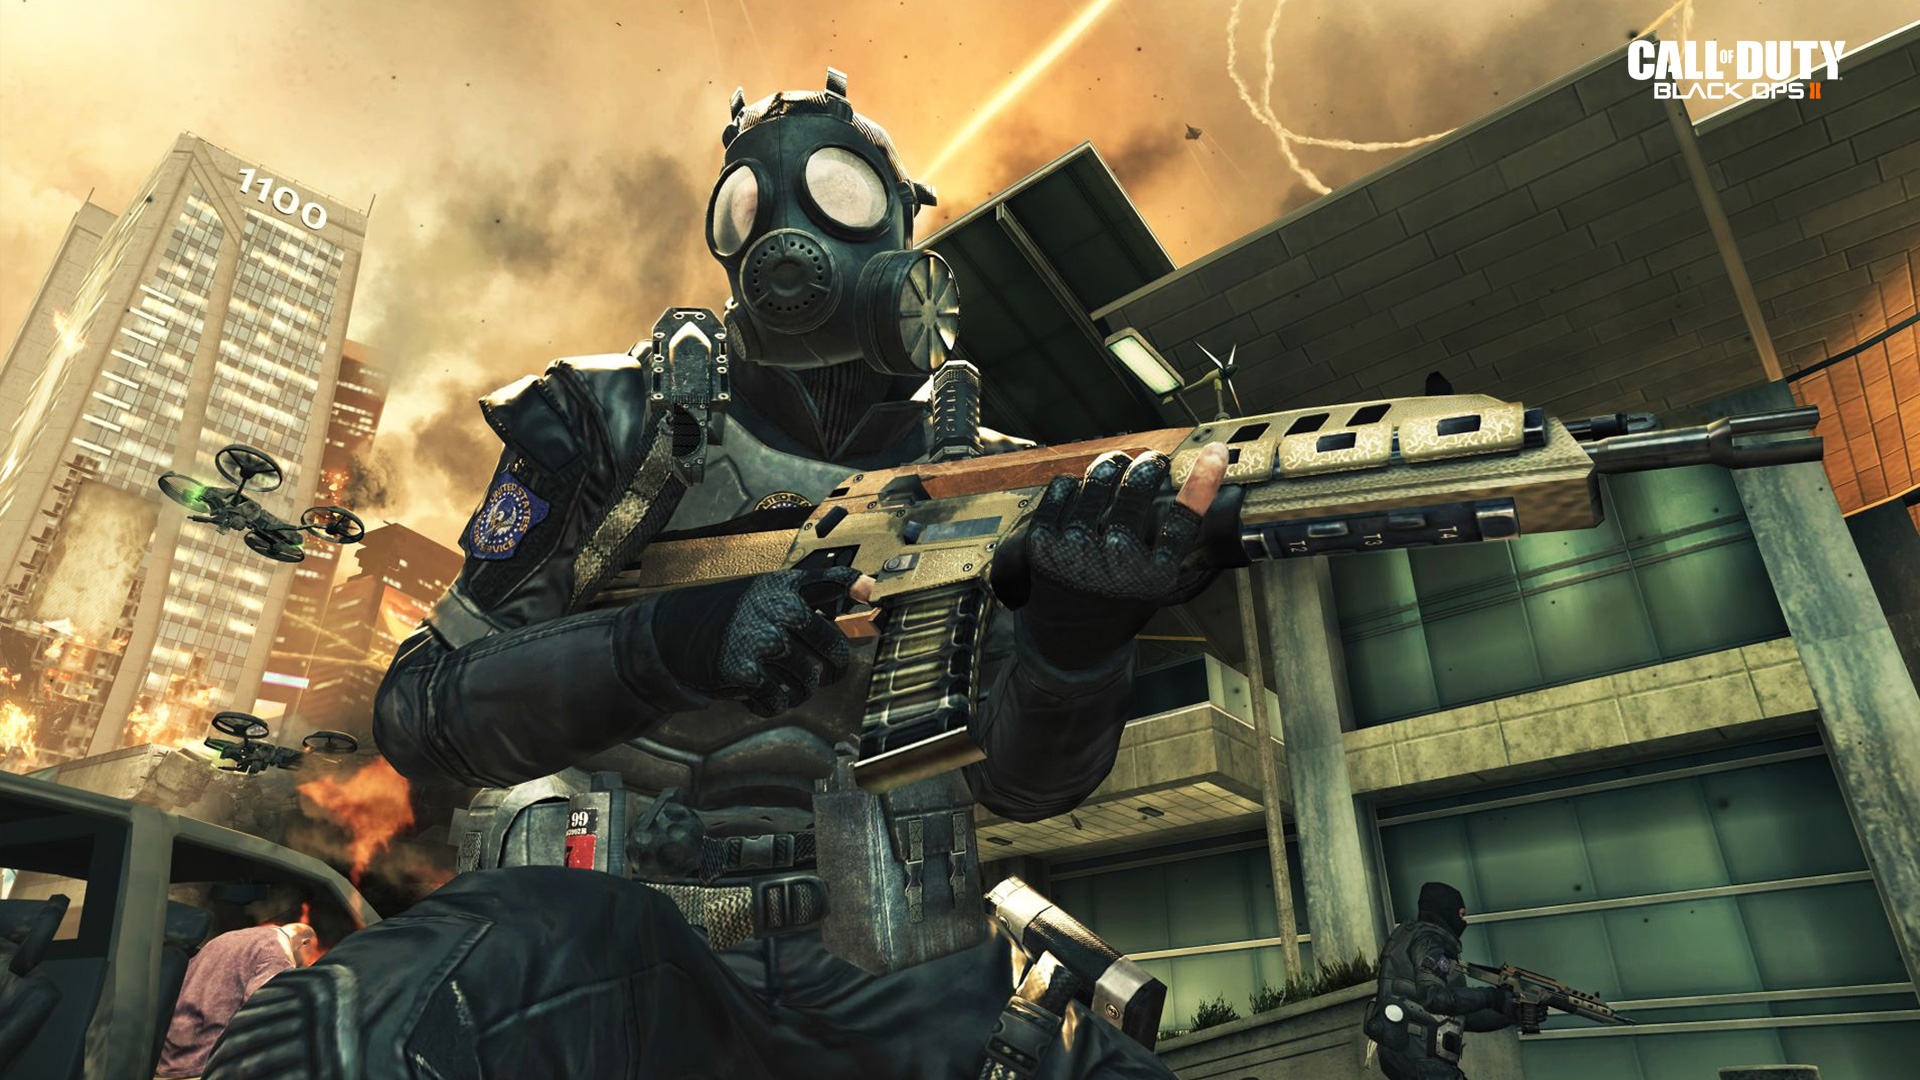 Wallpaper HD 1080pcall Of Duty Black Ops 1080p